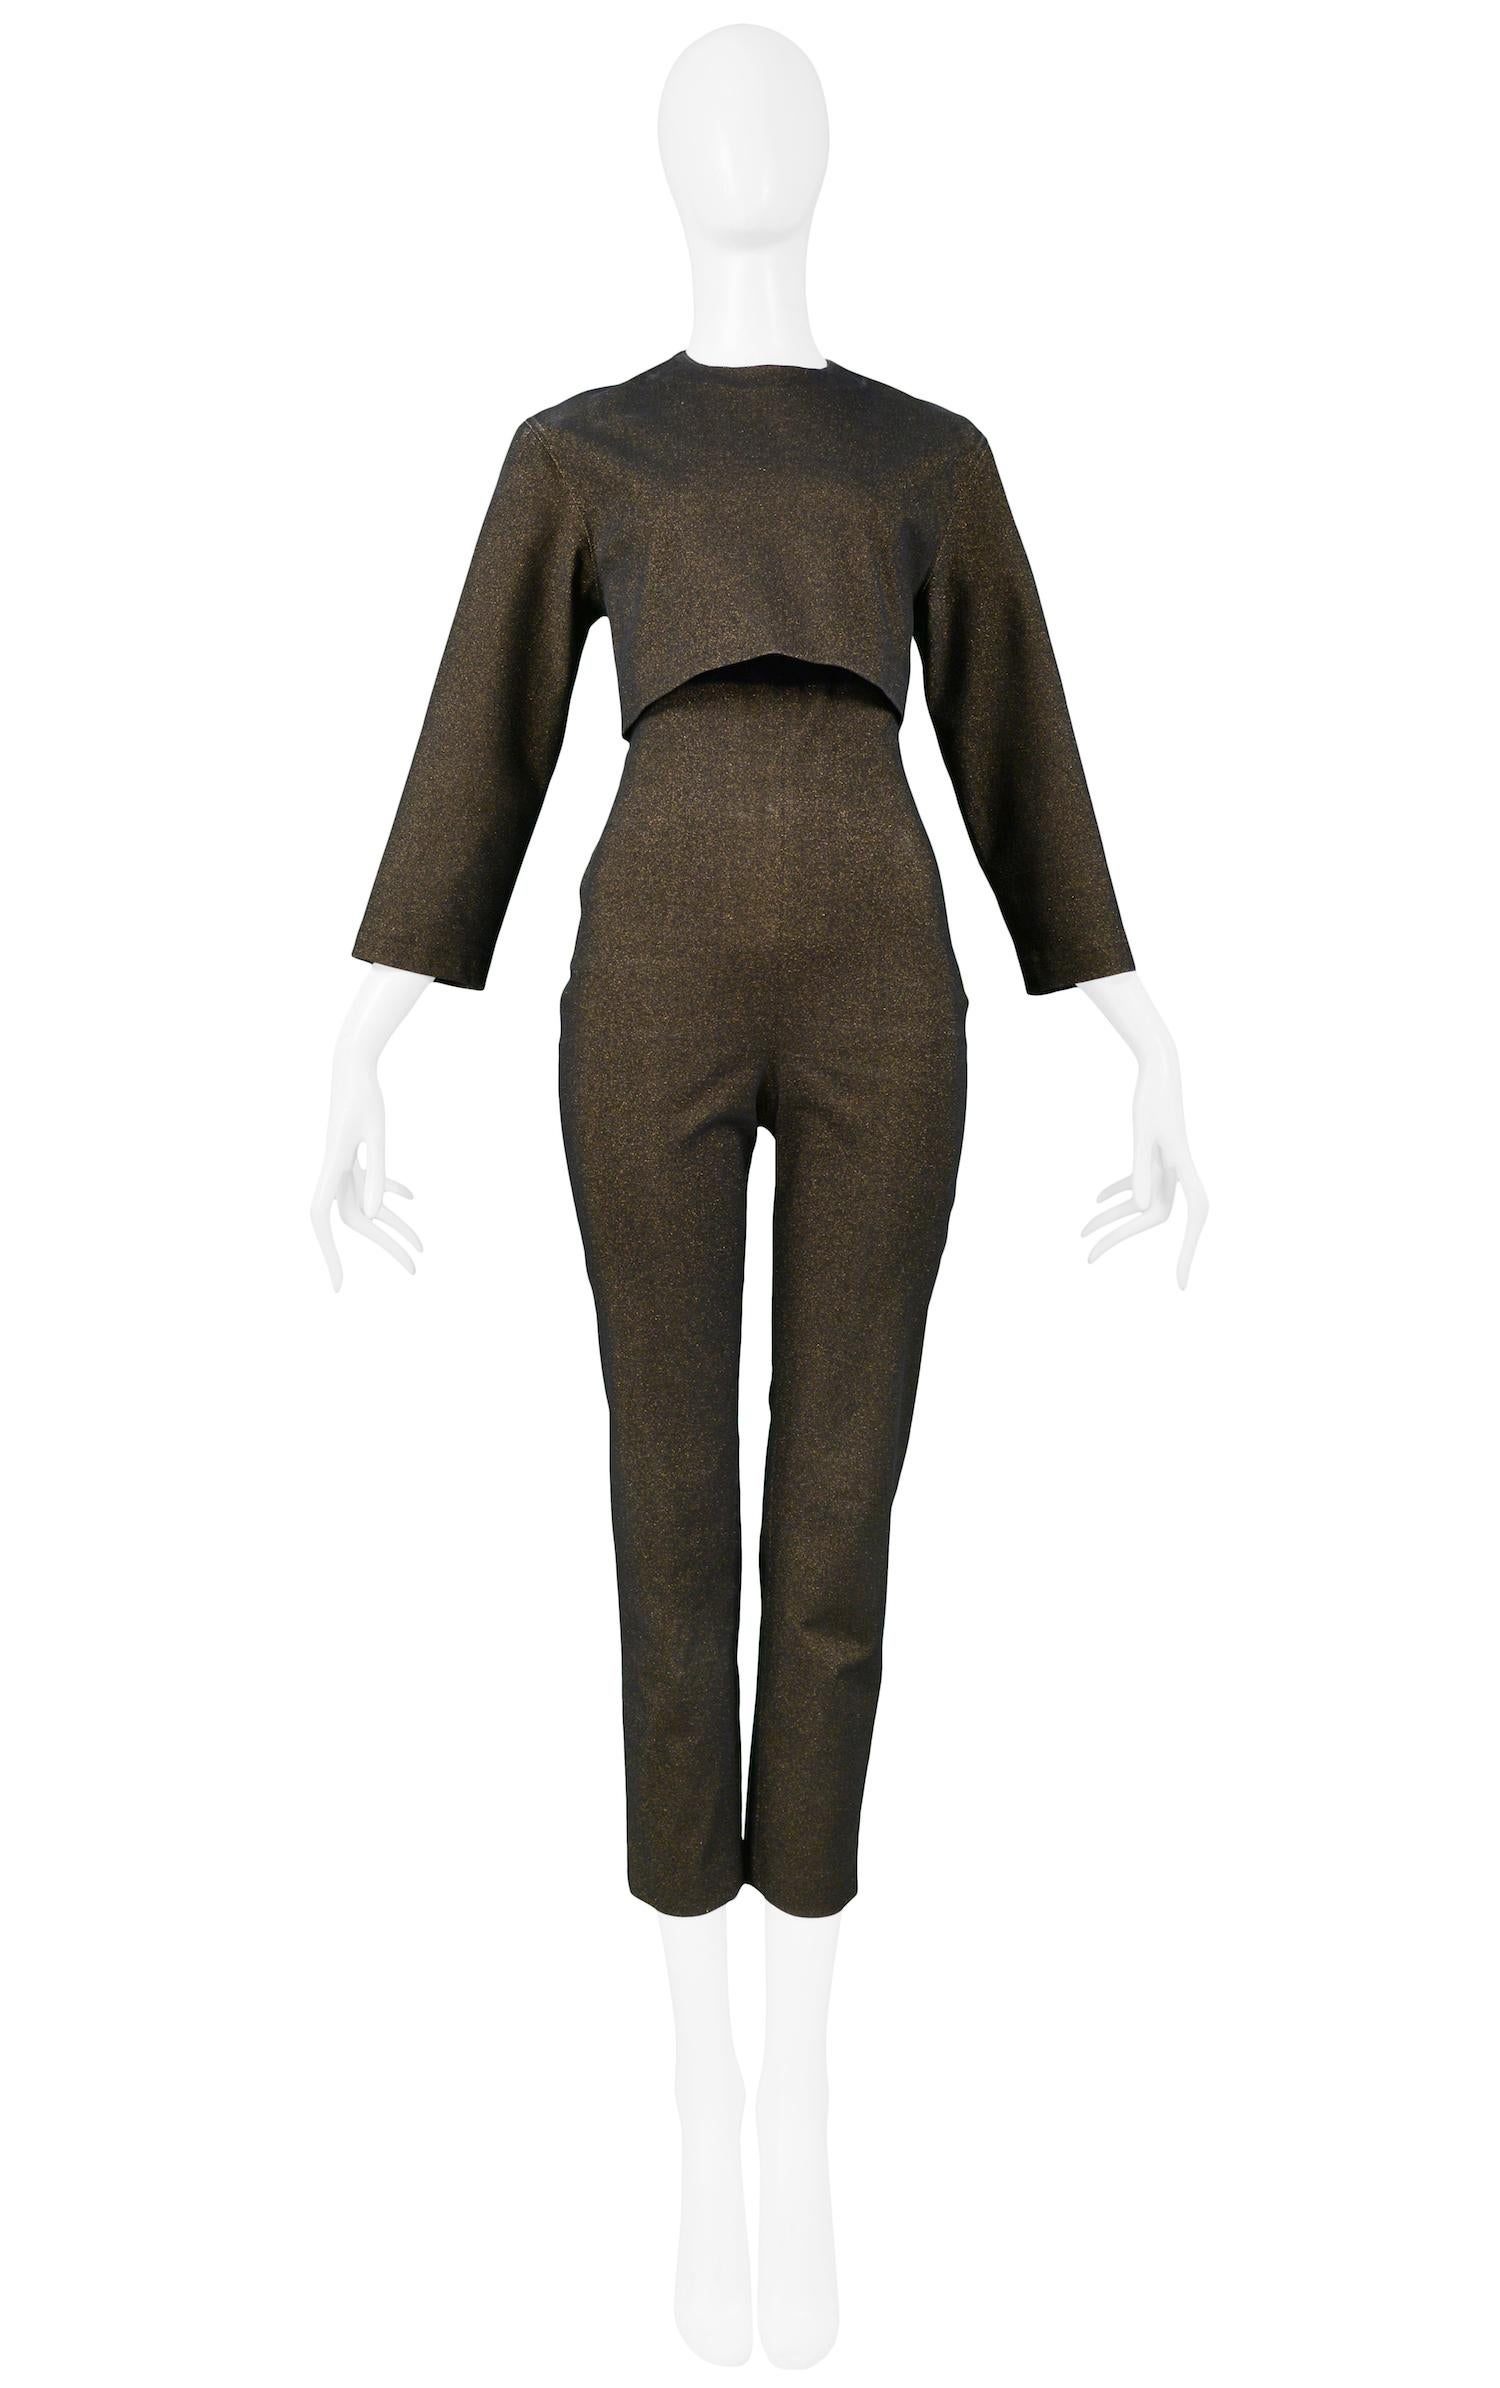 Vintage Jean Paul Gaultier bronze metallic & black knit sleeveless jumpsuit with matching crop top / jacket featuring three-quarter length sleeves. The jumpsuit has a invisible zipper closure at center back, and the jacket has a partial zipper at